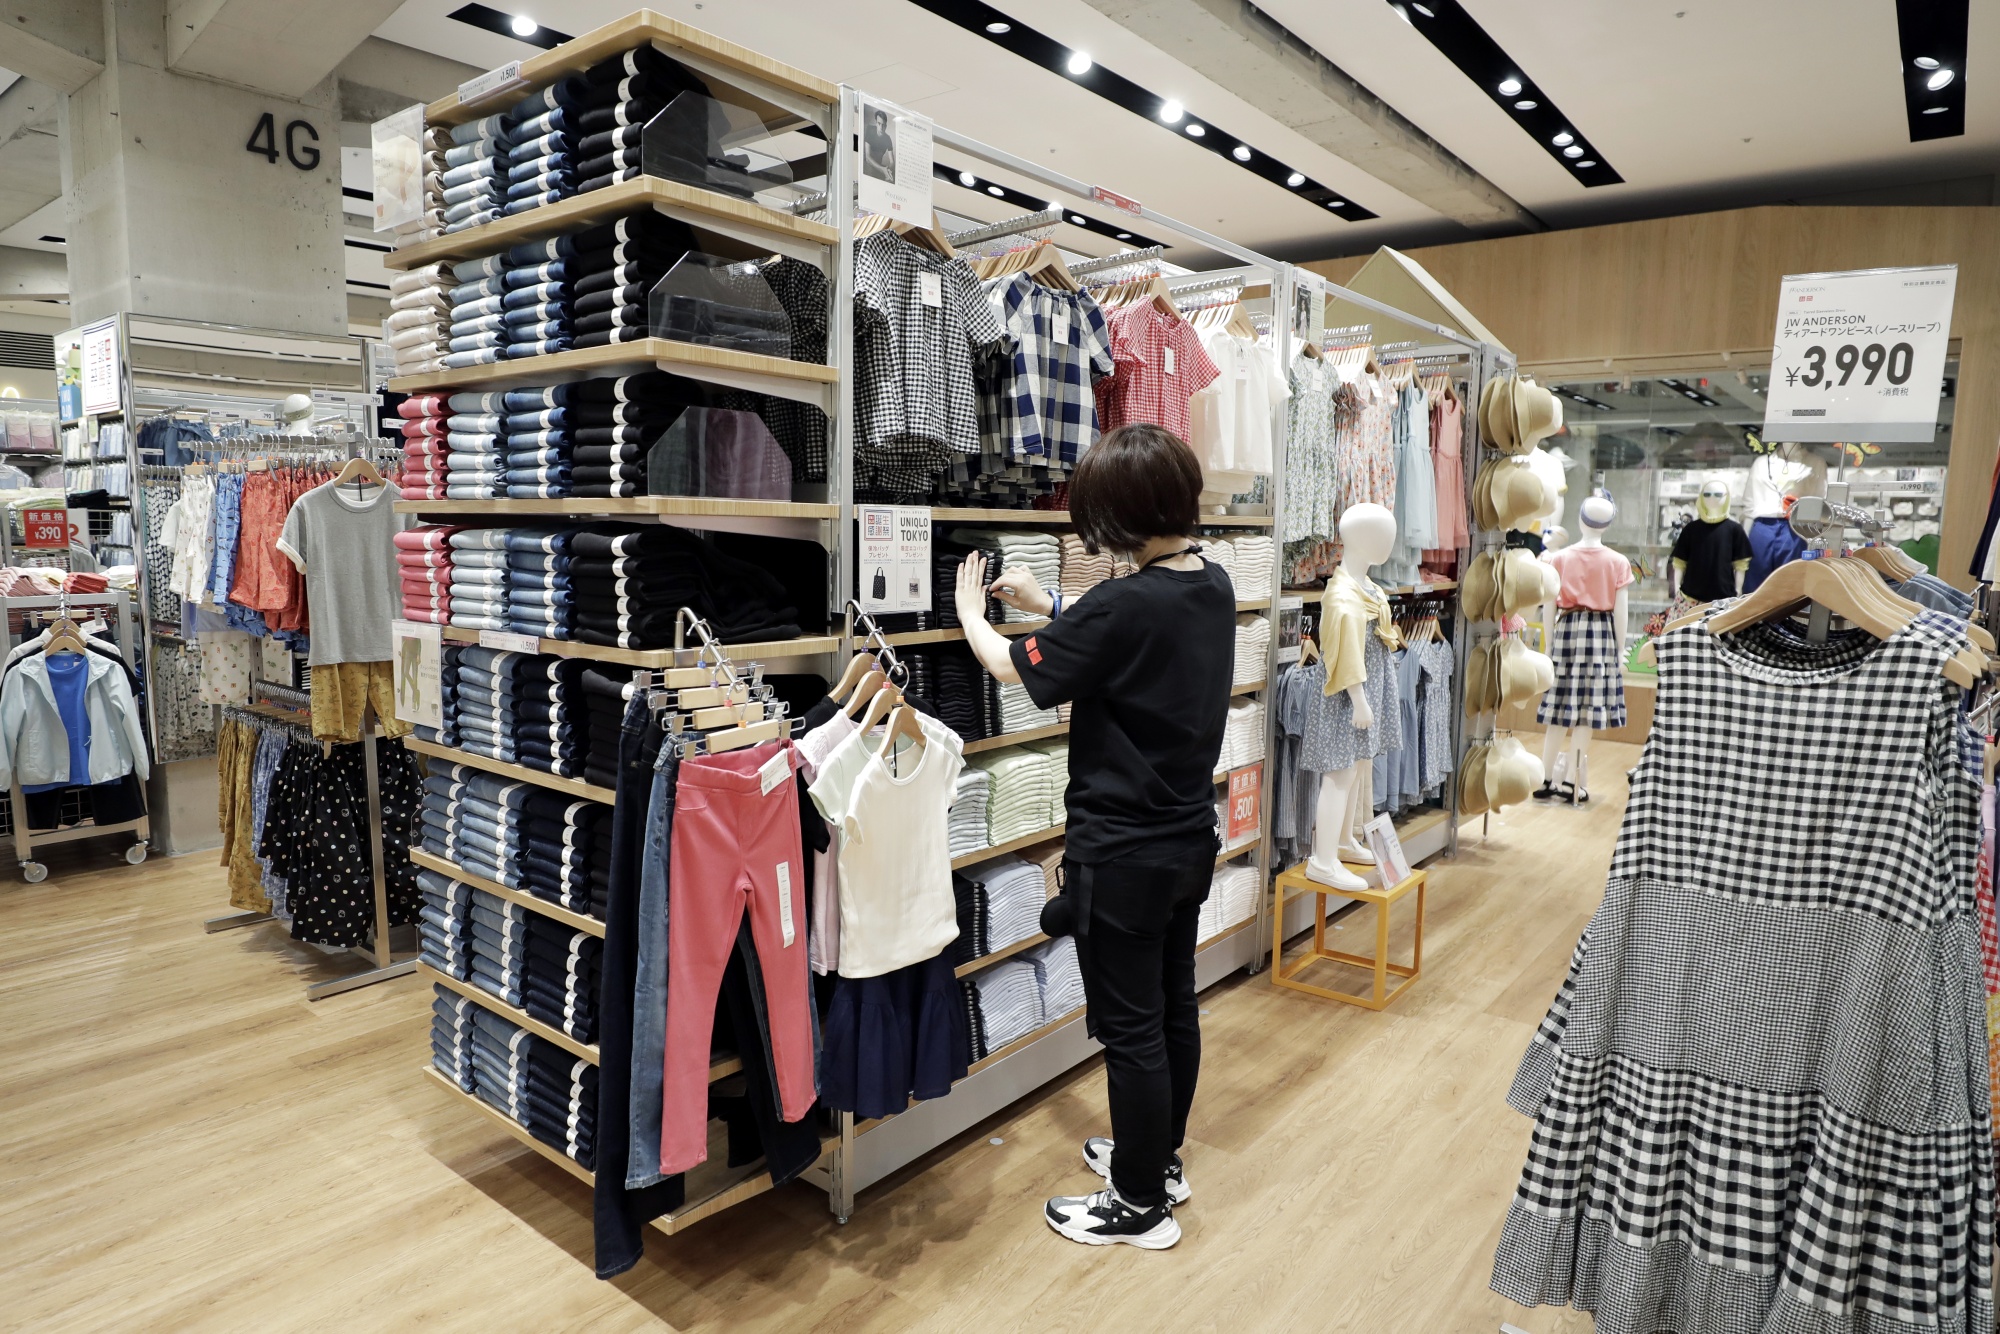 Uniqlo owner warns of big profit drop in China due to Covid-19 curbs